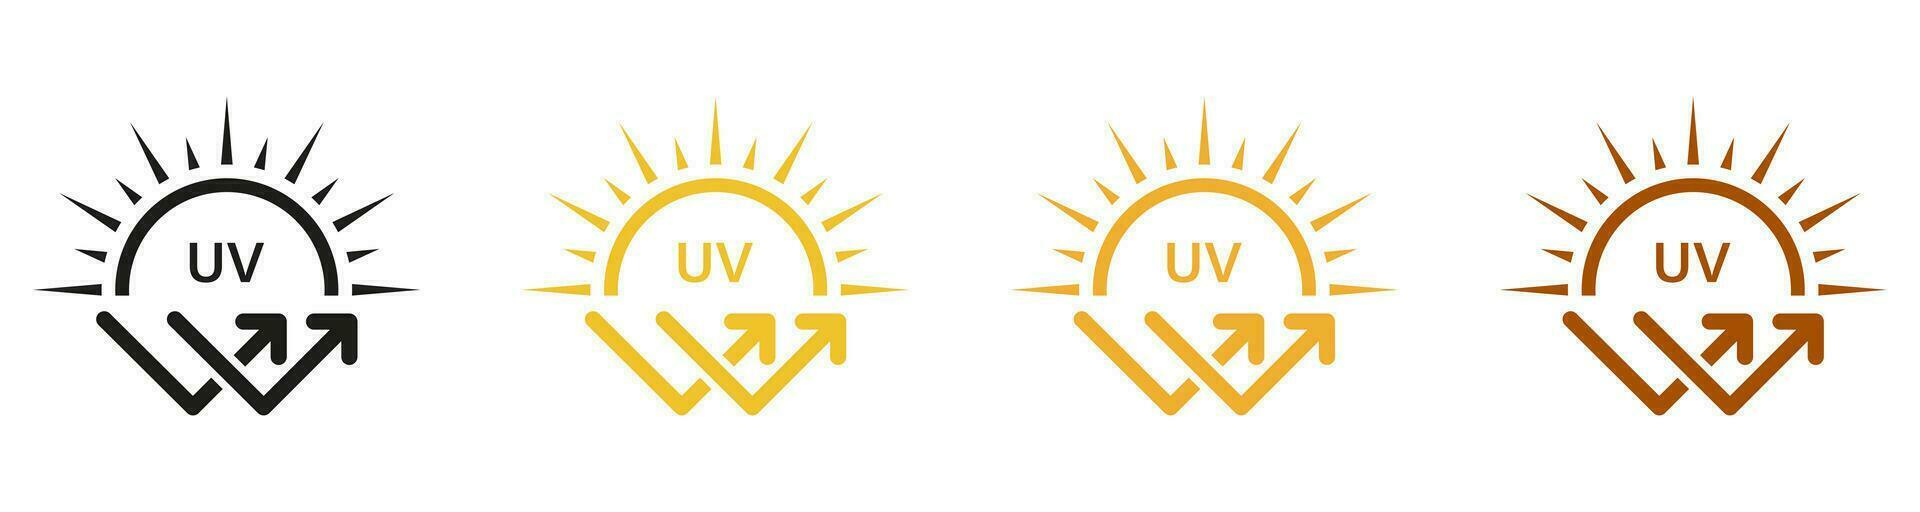 Block Solar Radiation and Ultraviolet Rays Symbol Collection. Sunblock Cream Label. Skin Protect, Danger UV Sunlight Pictogram. Sunscreen Lotion, SPF Protection Icon Set. Isolated Vector Illustration.